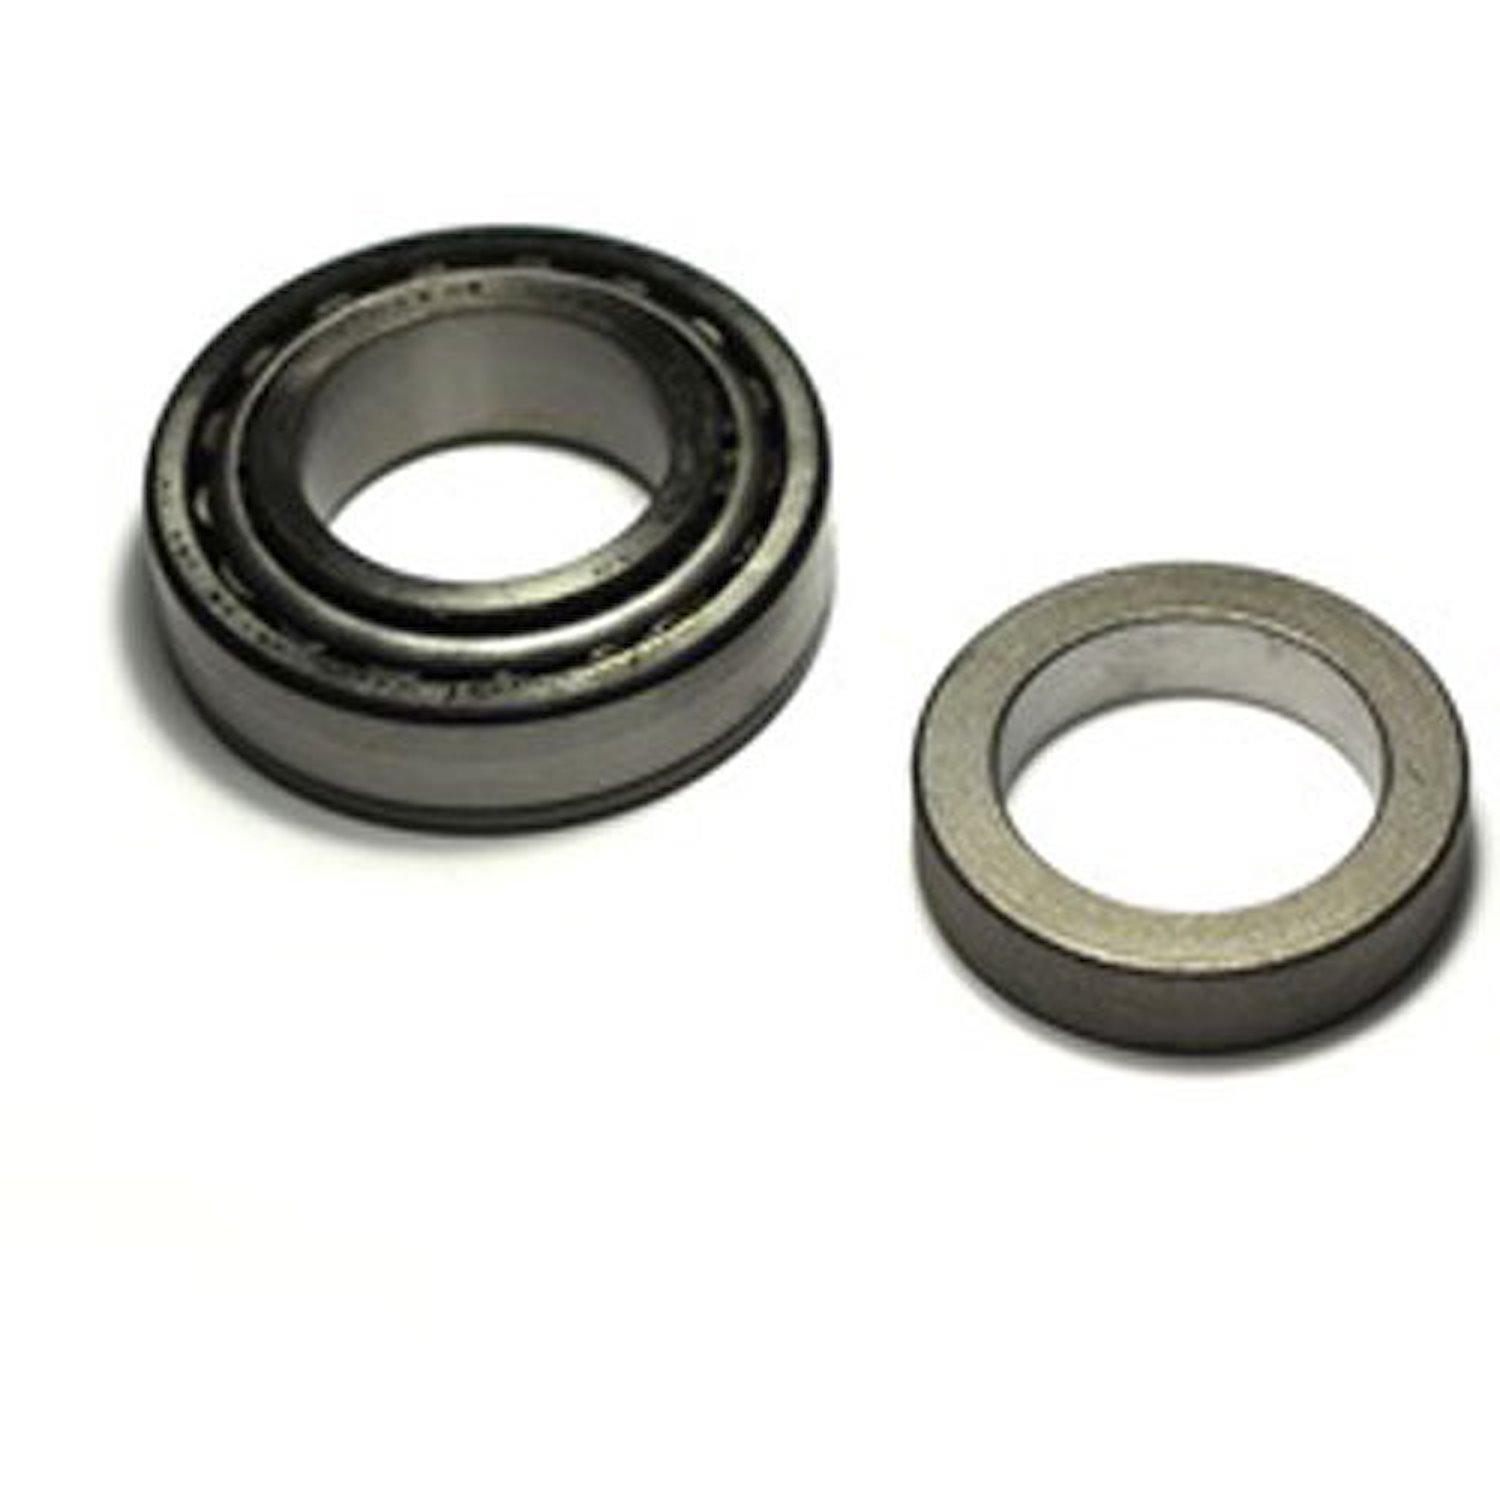 Axle Shaft Bearing and Cup with Retainer for Dana 44 rear 1972-1975 CJ 1986 CJ7 1987-2011 Wrangler 1986-1993 Cherokee